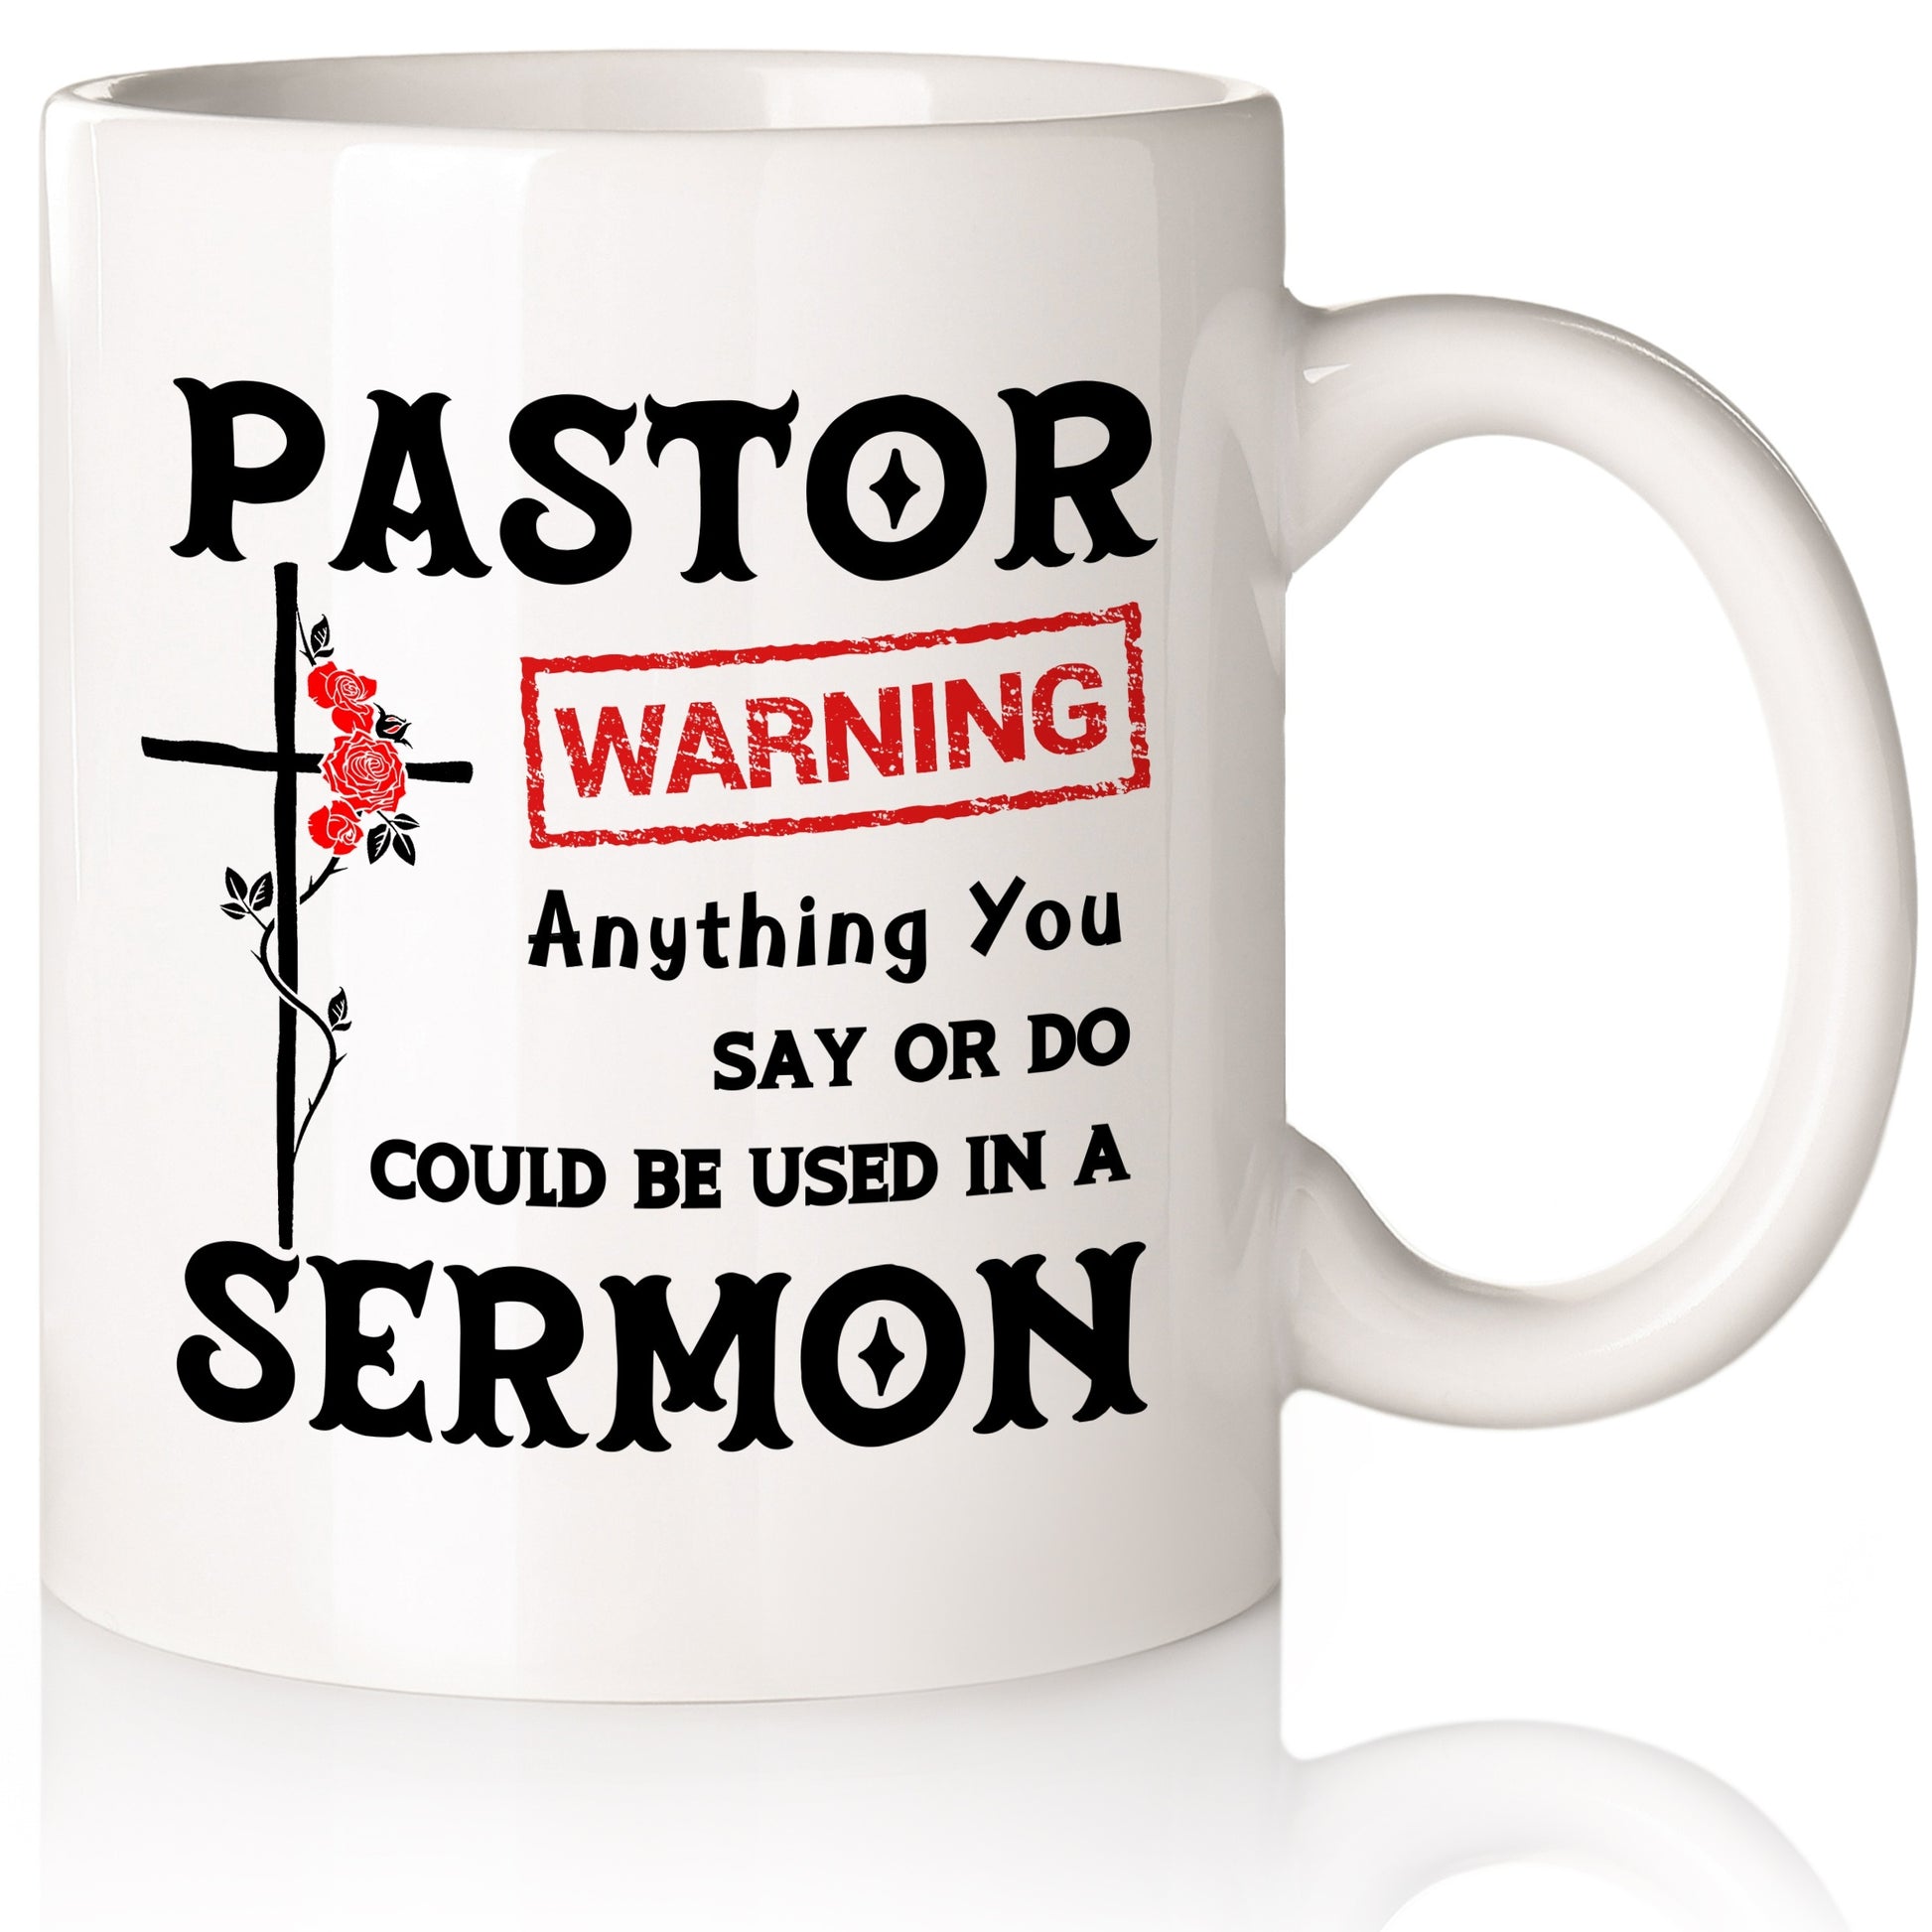 Pastor Warning: Anything You Say Or Do Could Be Used In A Sermon Christian White Ceramic Mug 11oz claimedbygoddesigns